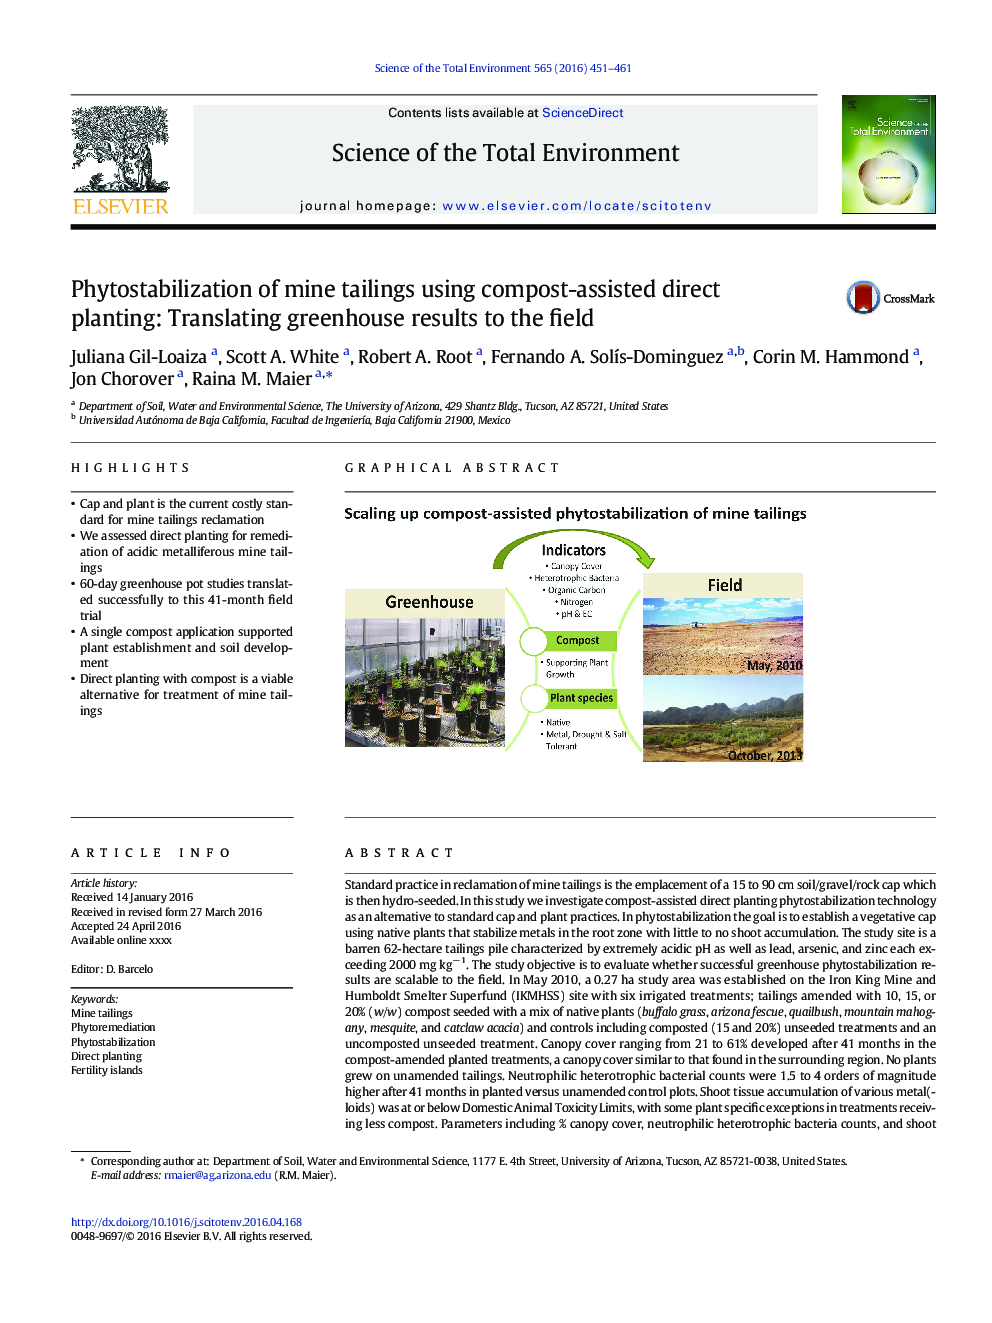 Phytostabilization of mine tailings using compost-assisted direct planting: Translating greenhouse results to the field